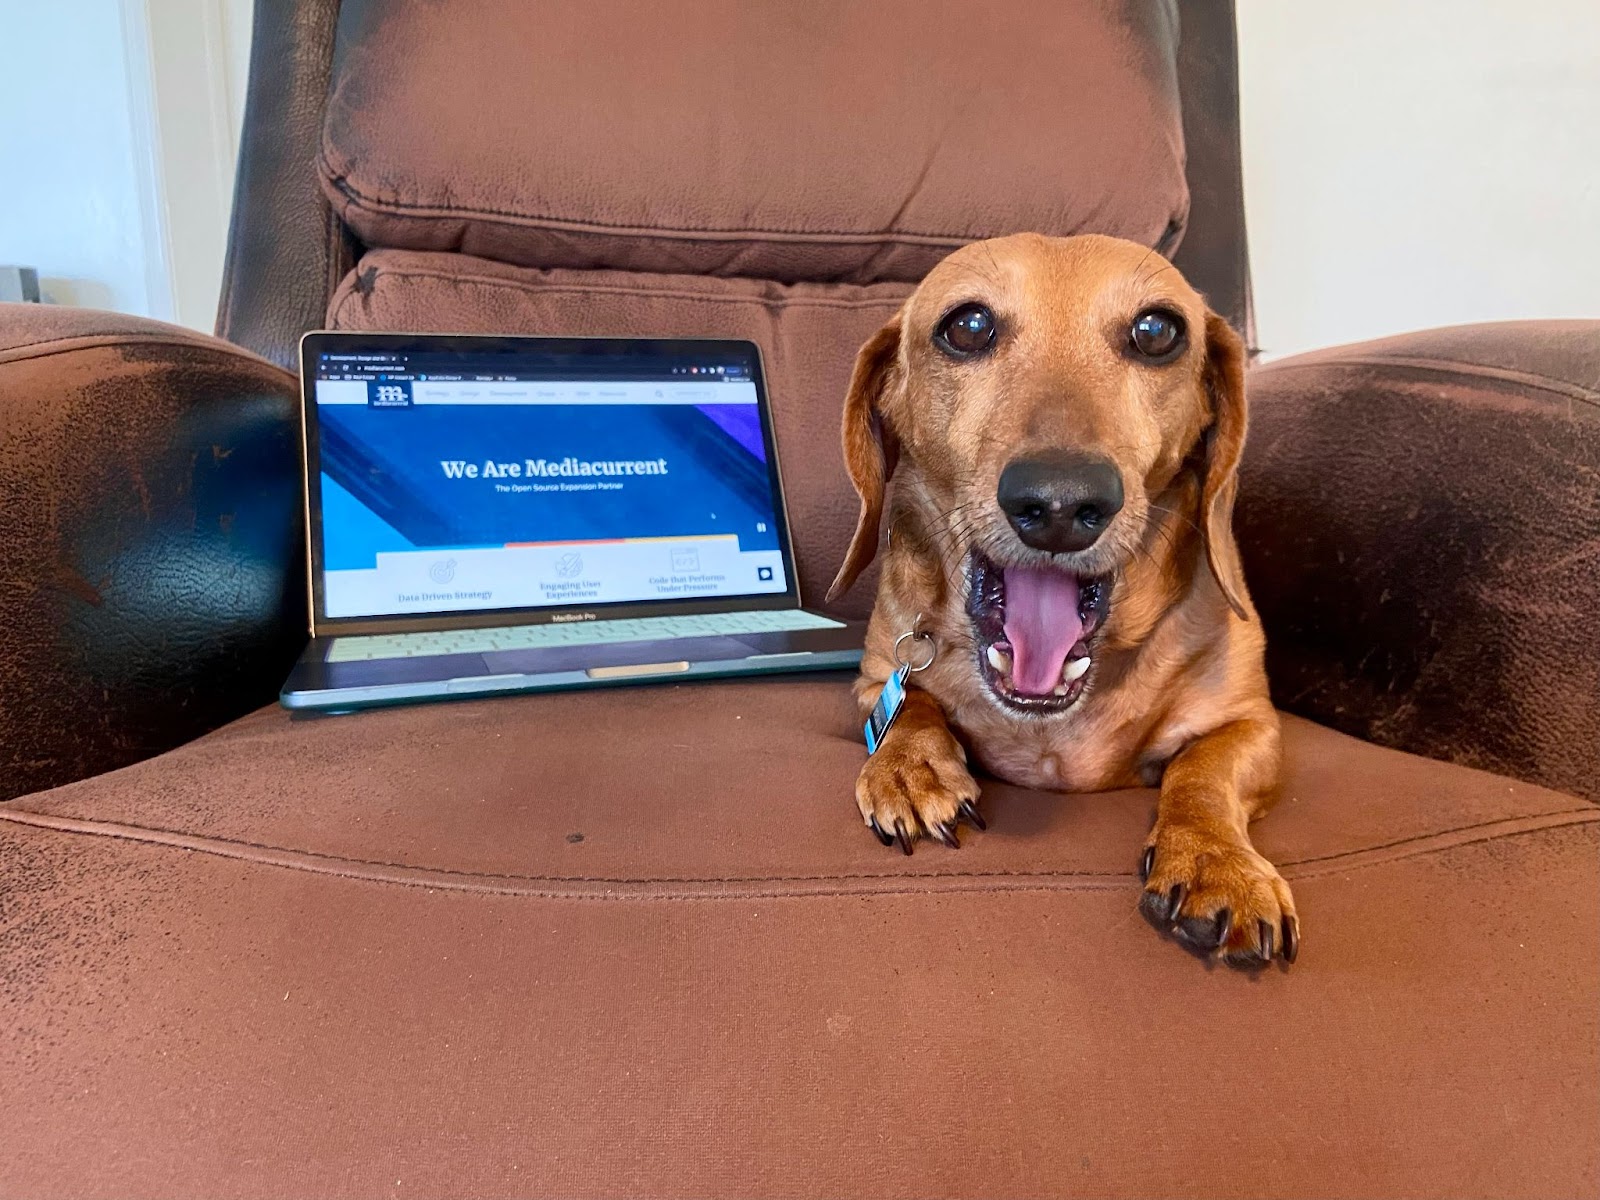 Dog on couch next to laptop